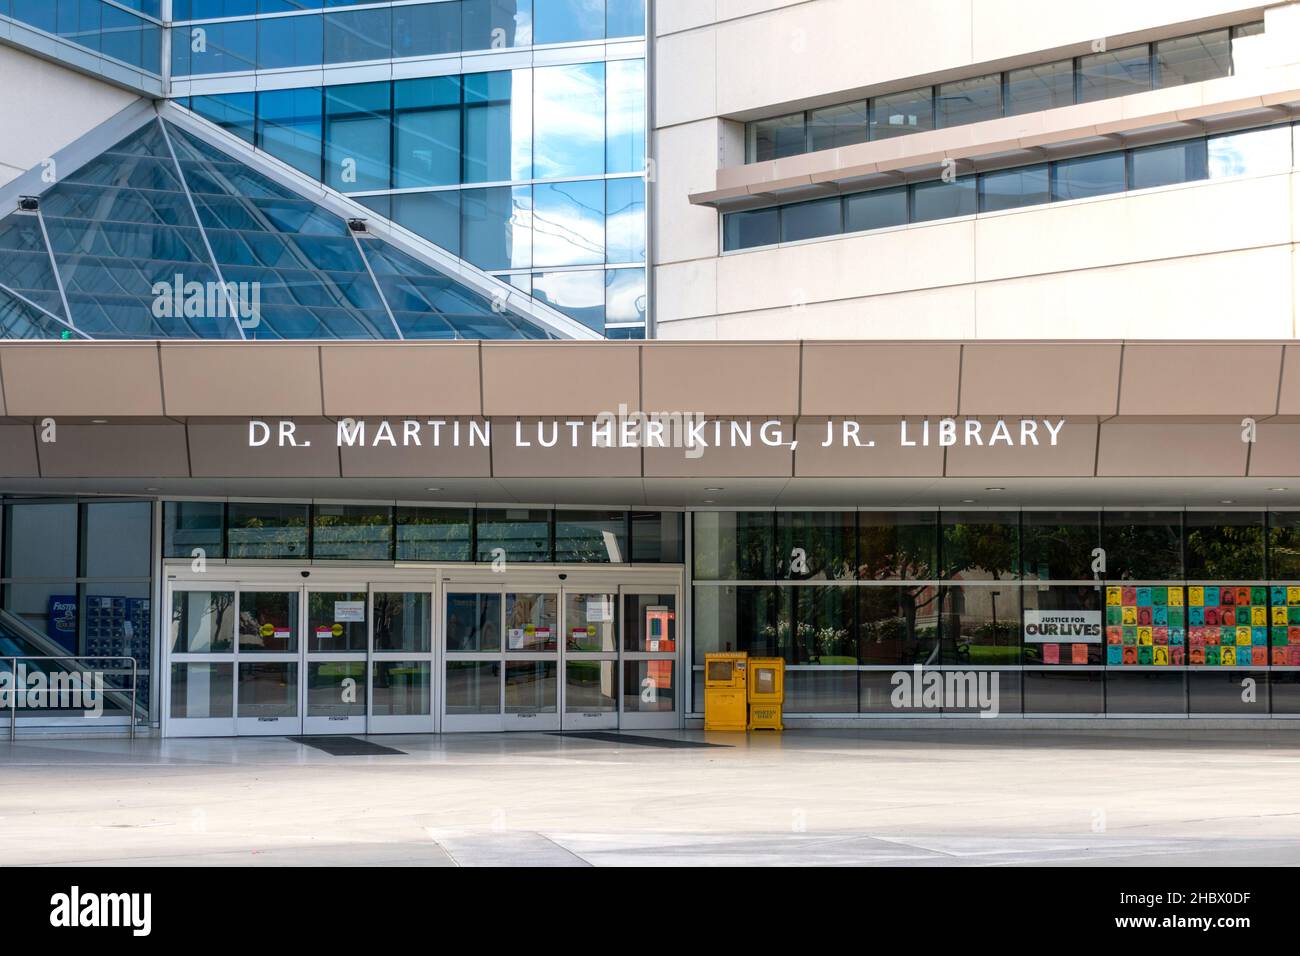 Dr. Martin Luther King JR. Library sign above the southeast entrance to public library and university library - San Jose, California, USA - 2021 Stock Photo